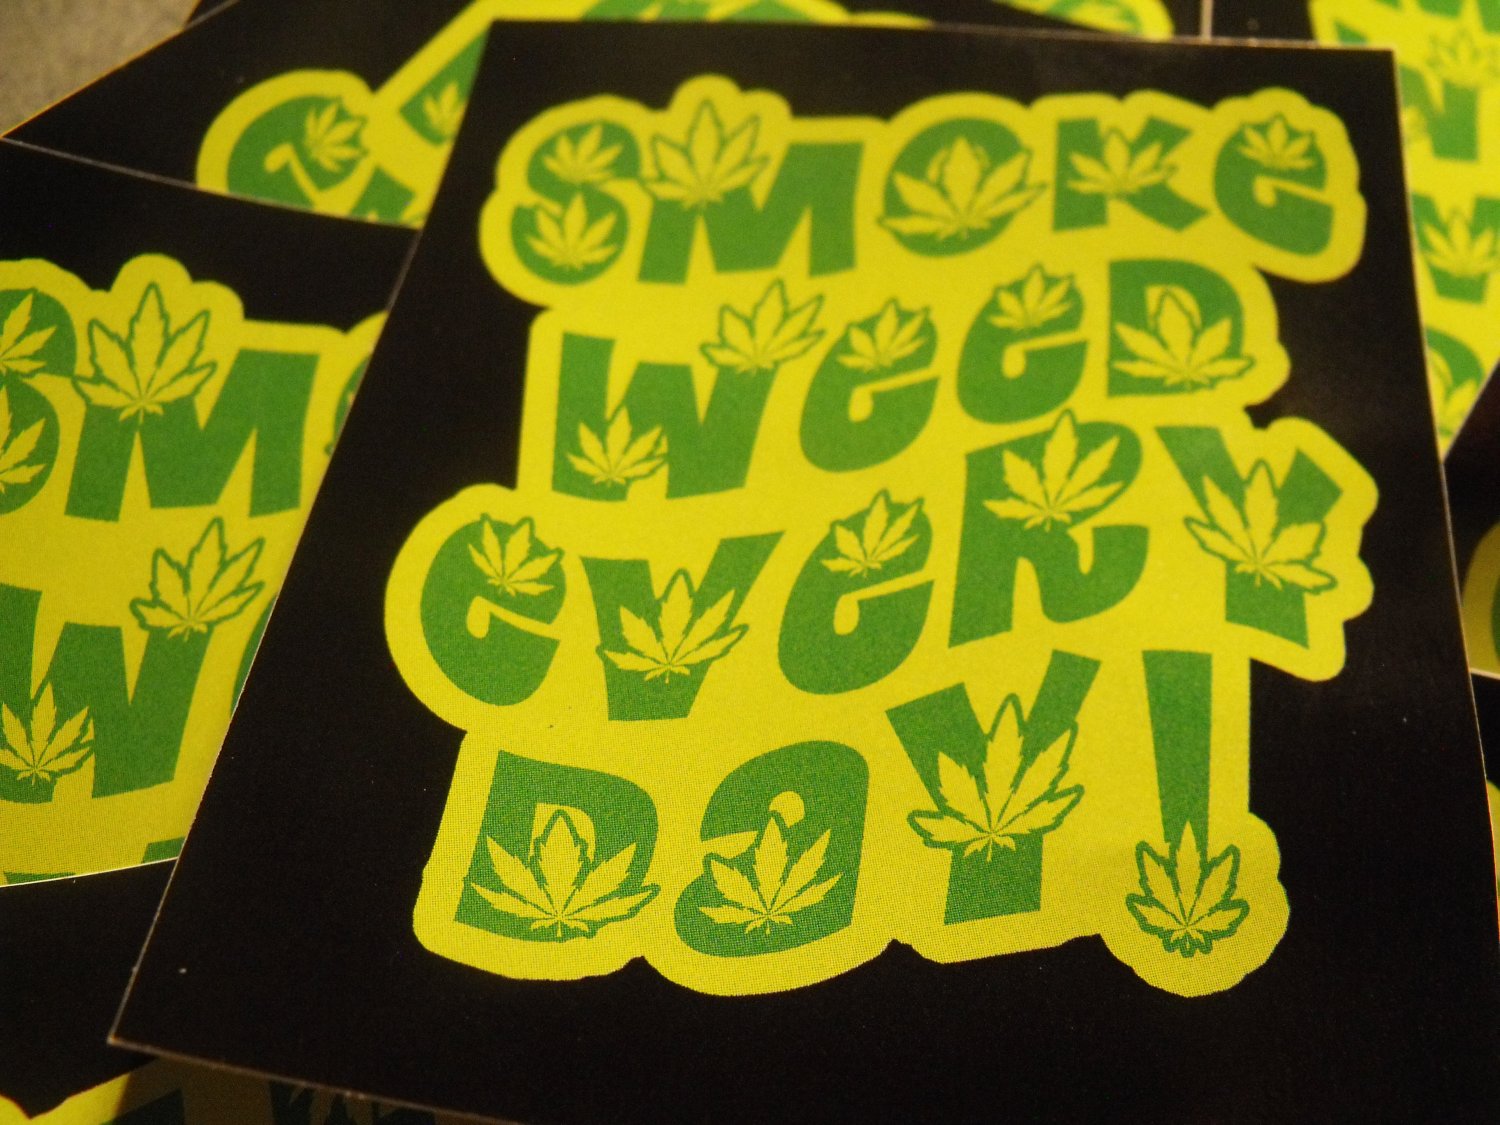 50 SMoKE WEED EVERY DAY!  3" x 2.5" stickers